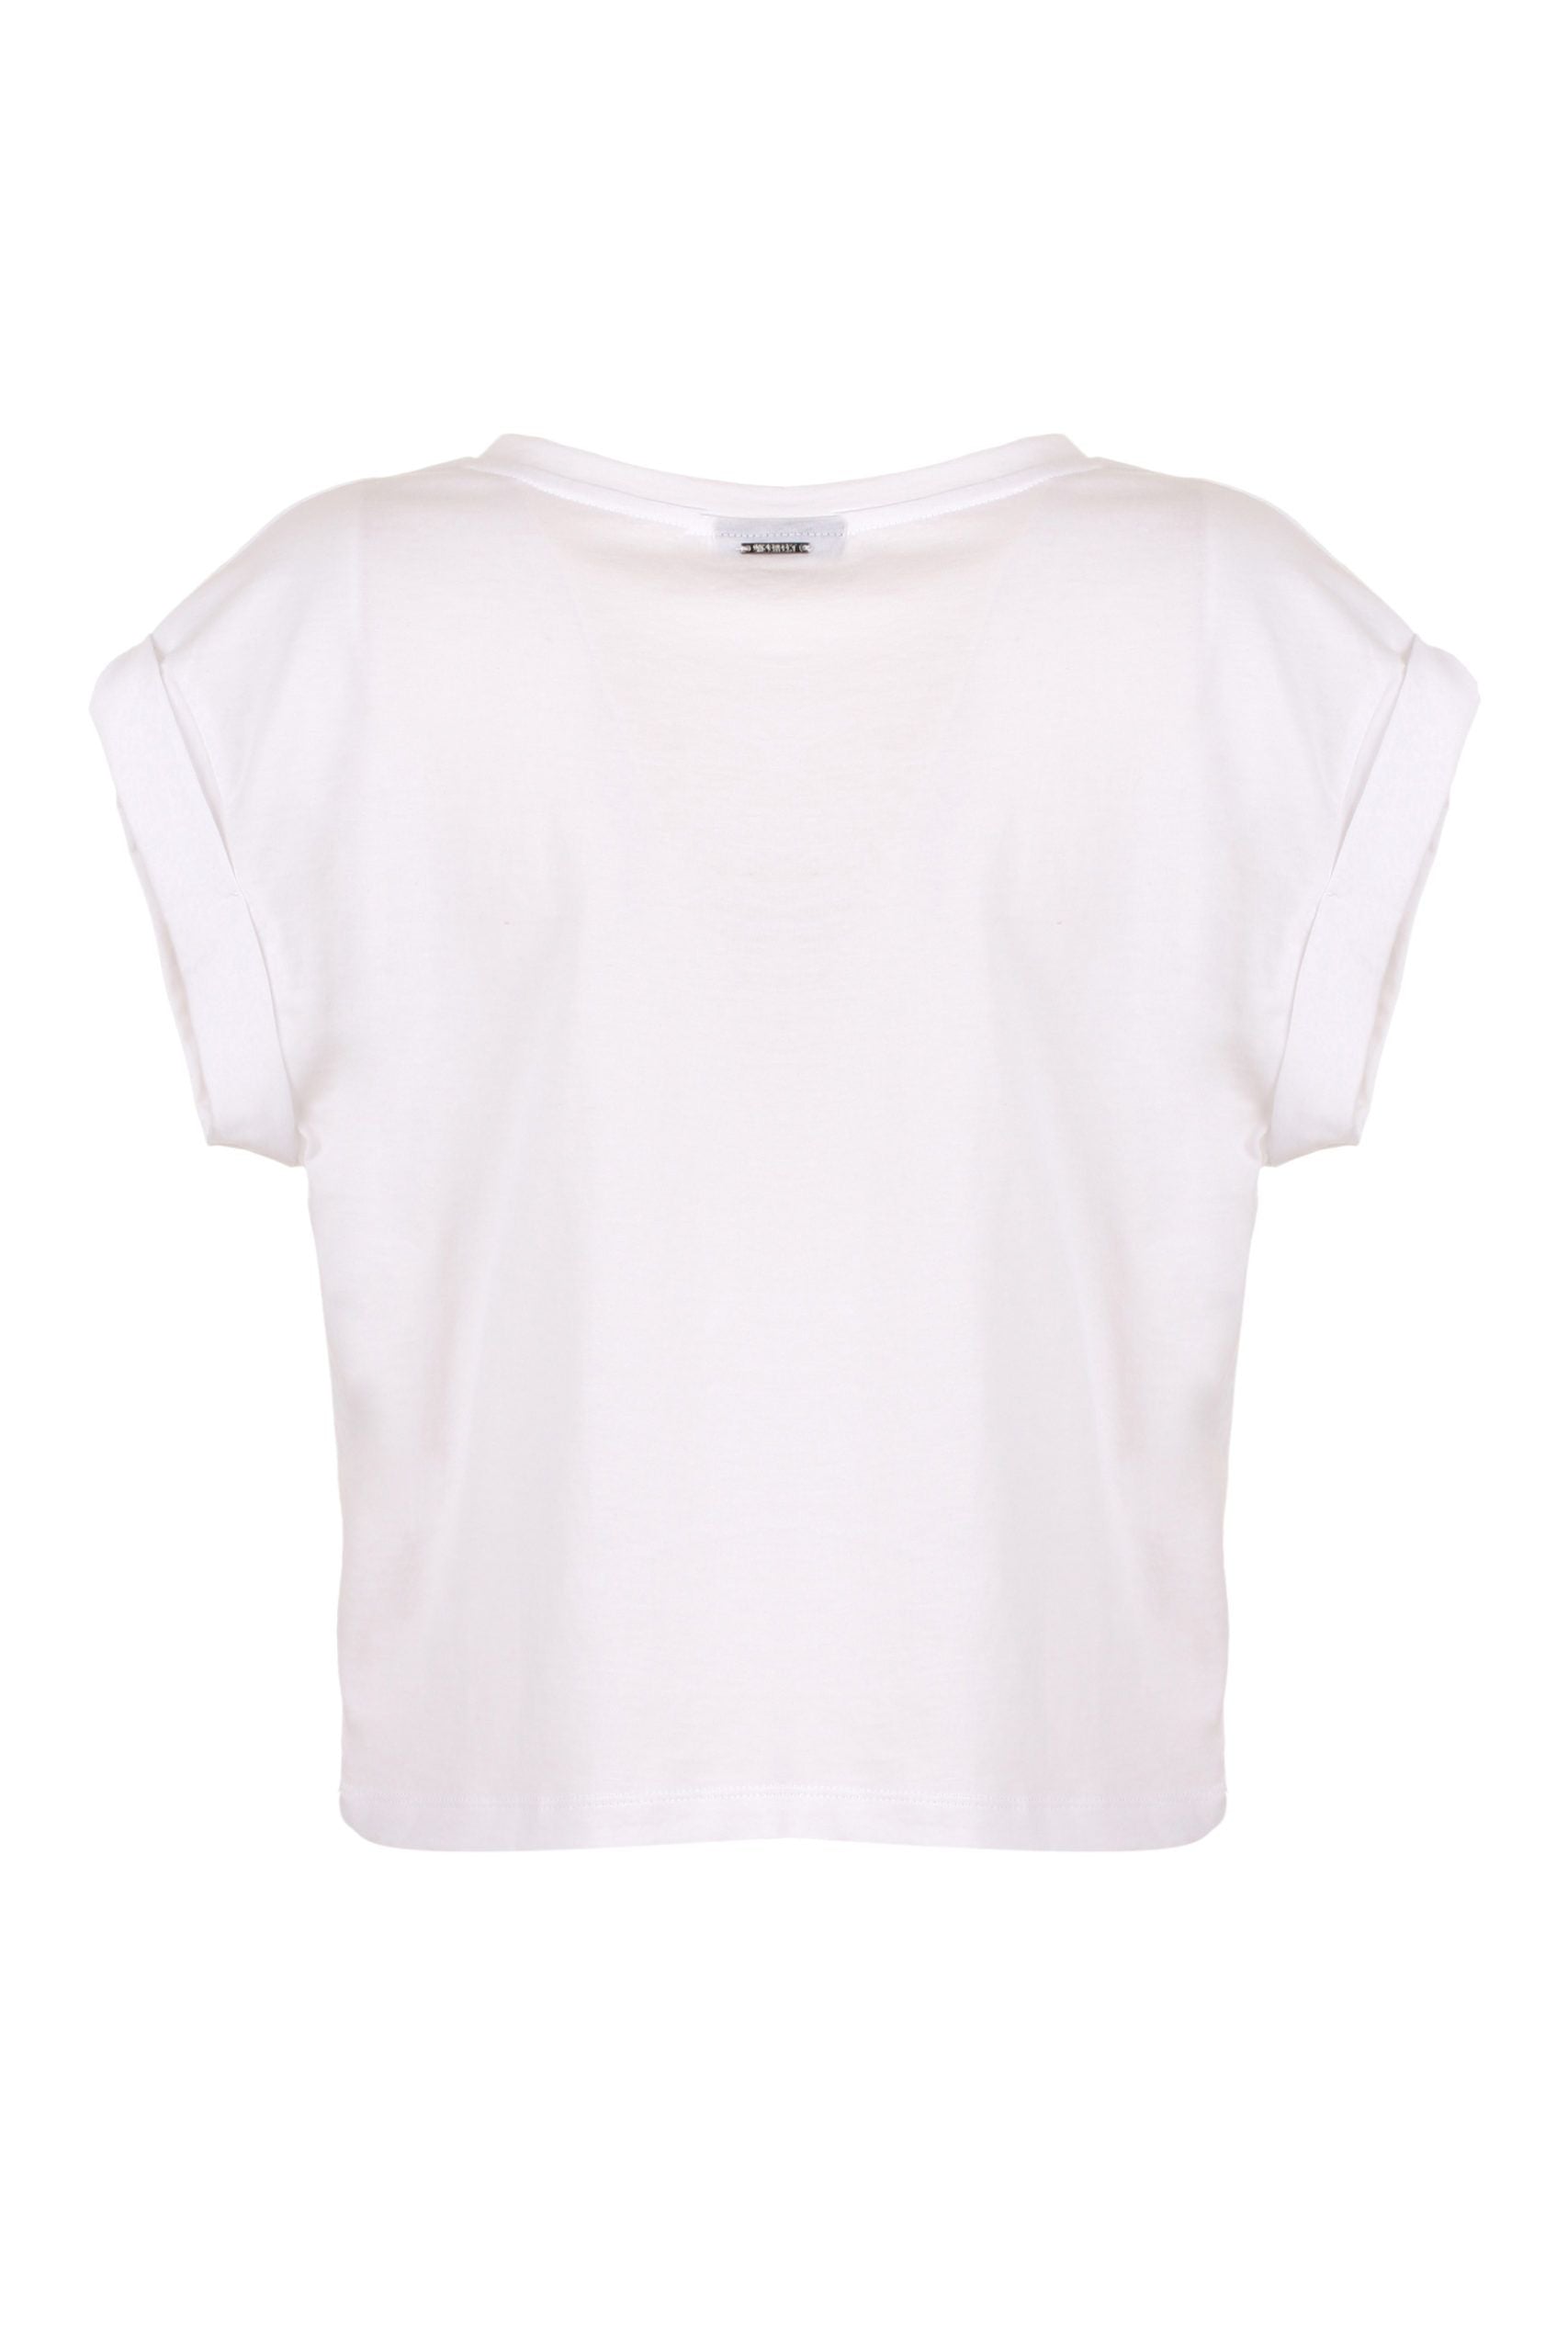 Imperfect Chic White Cotton Tee with Brass Accents